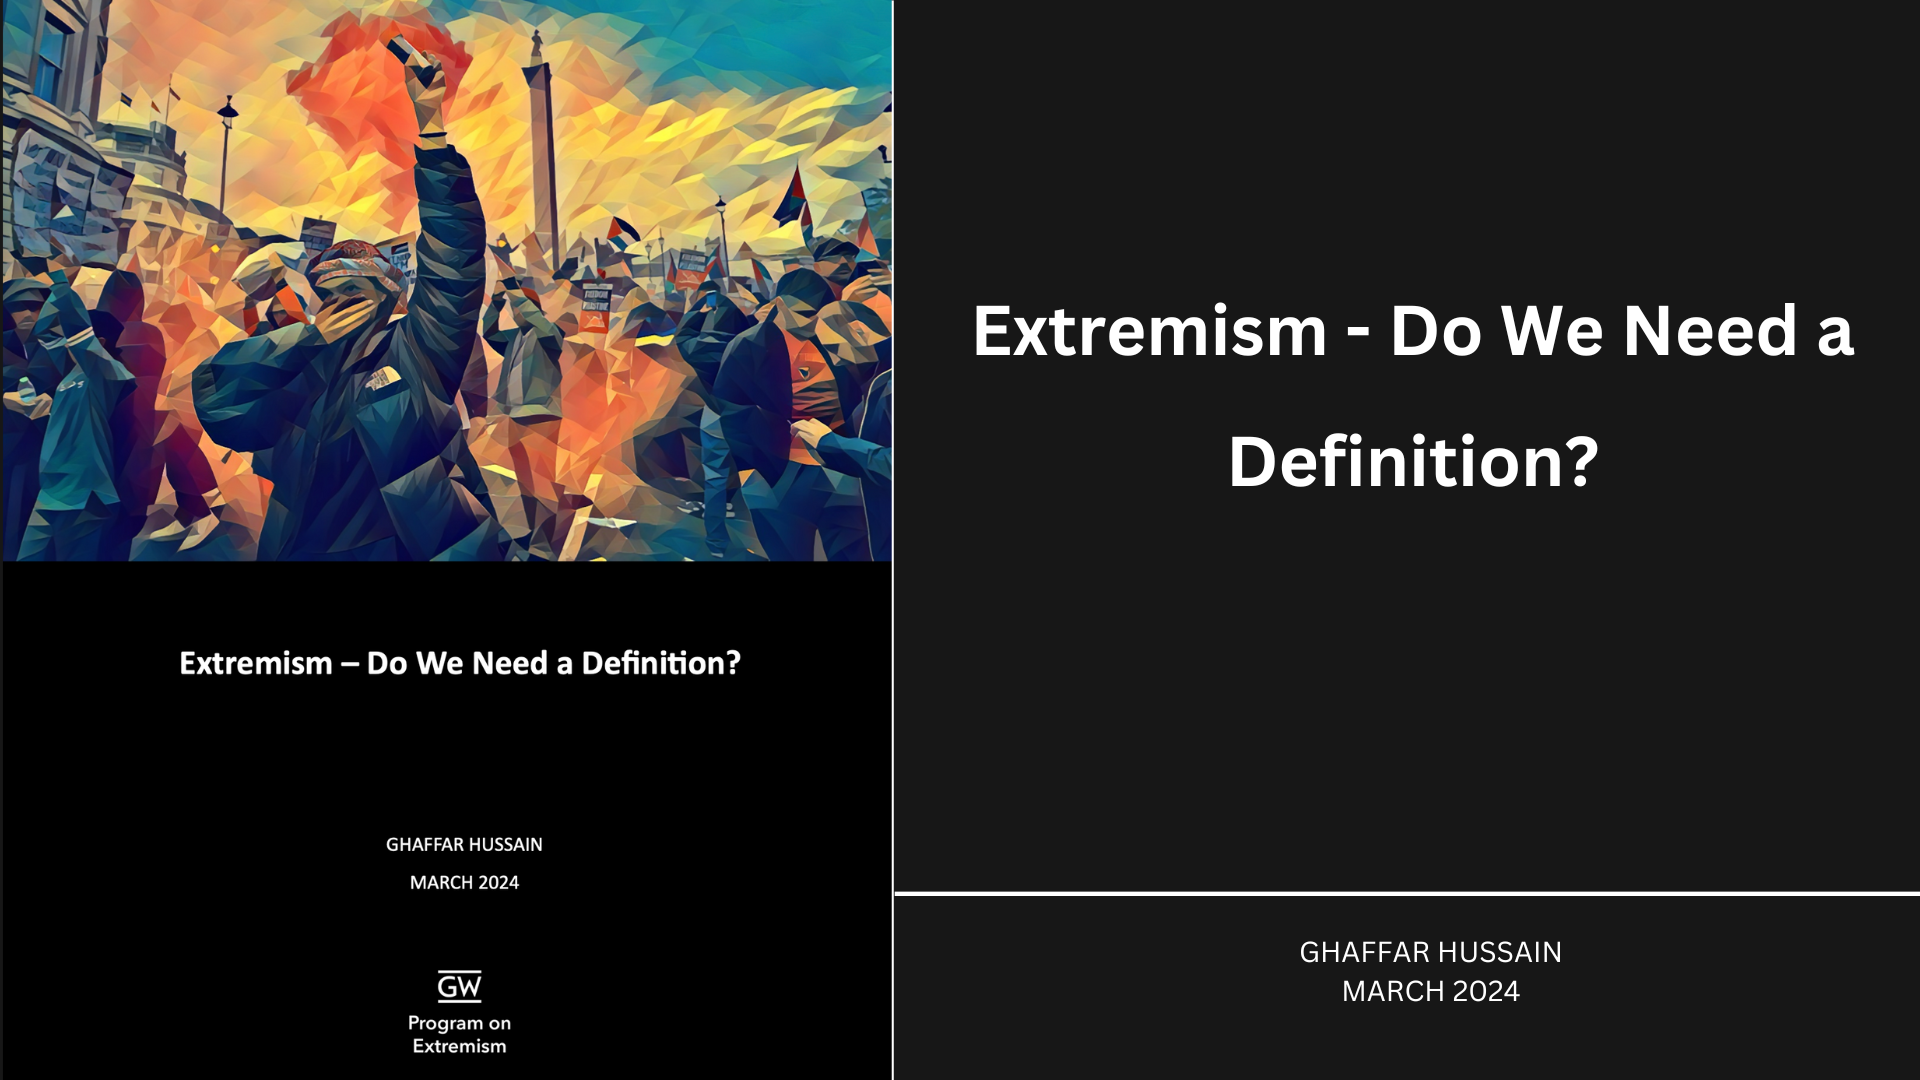 Extremism - Do We Need a Definition?